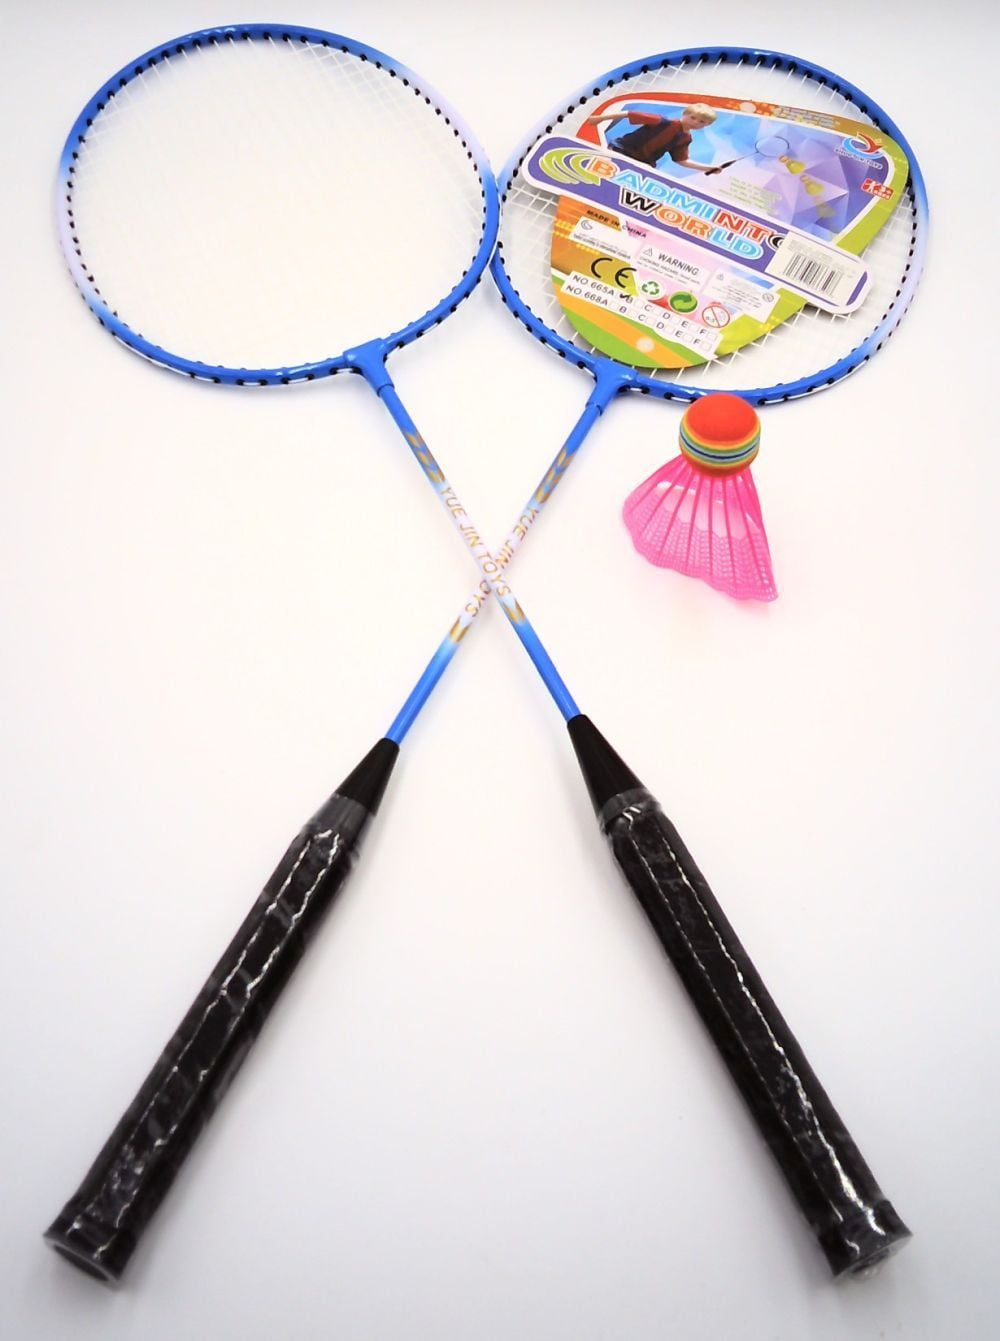 Water Sports Portable Complete Badminton Set with Rackets and Birdies